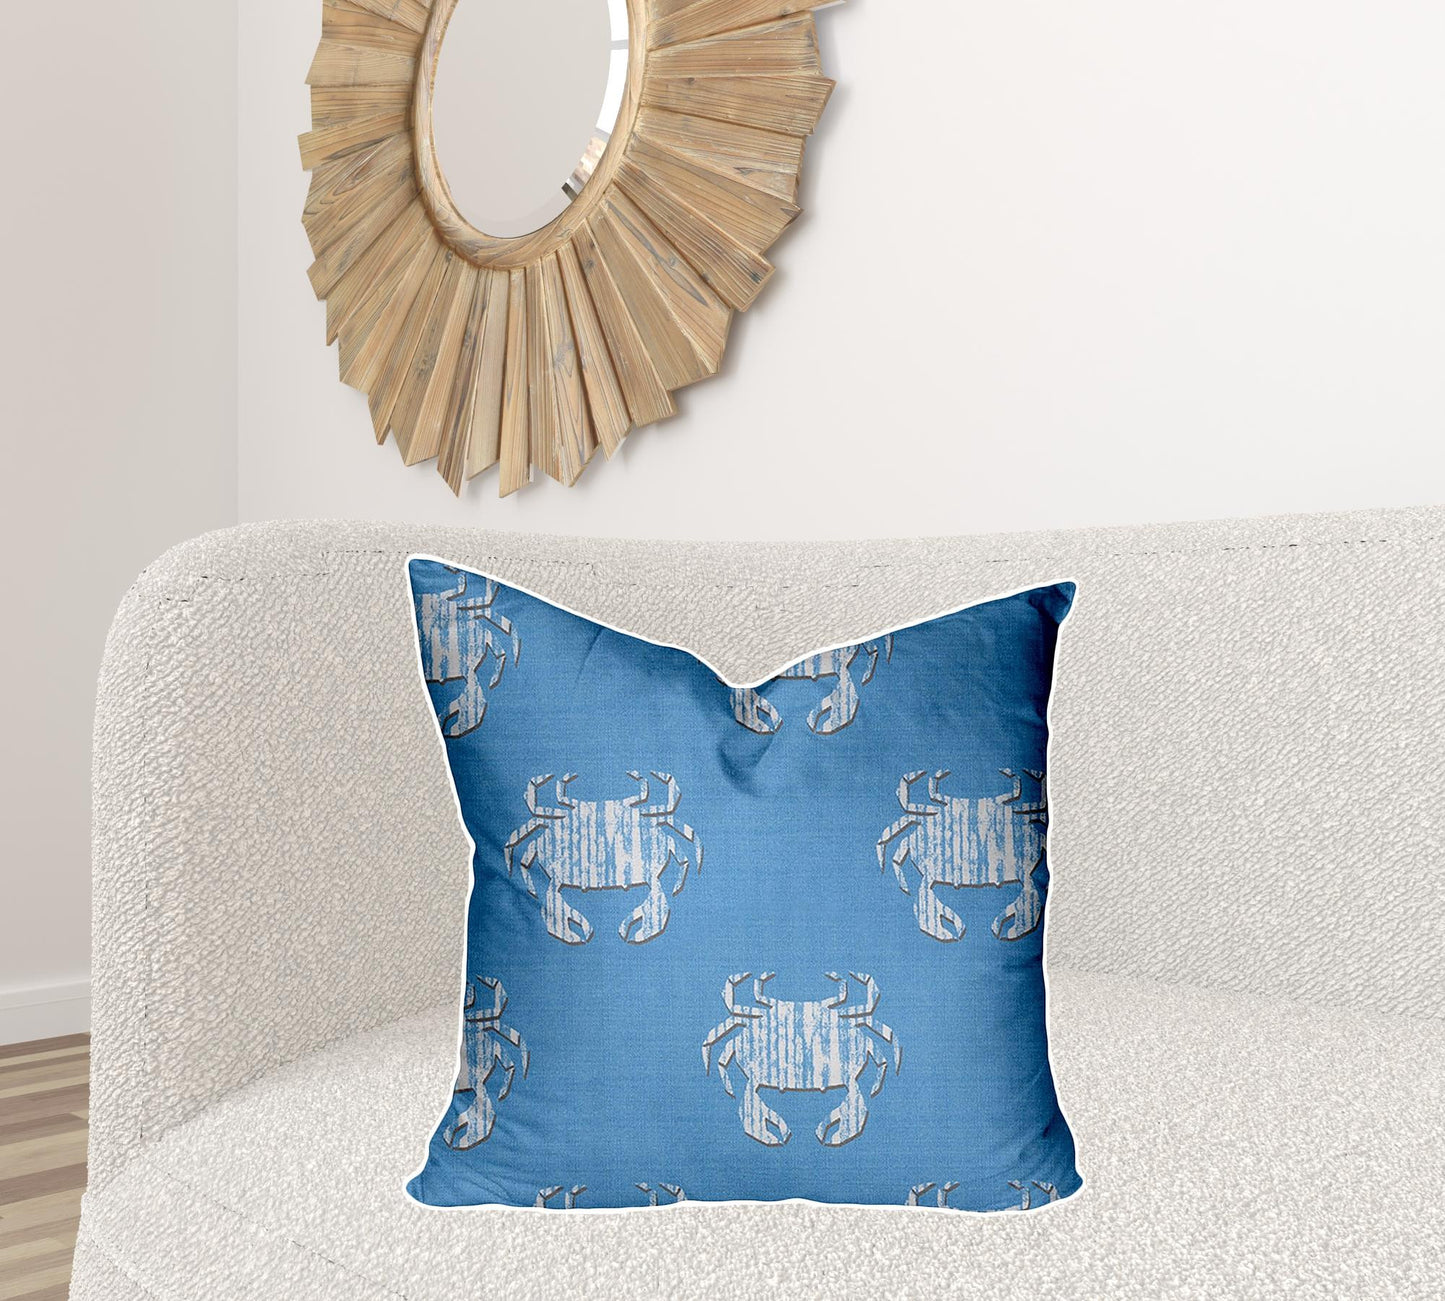 24" X 24" Blue And White Crab Enveloped Coastal Throw Indoor Outdoor Pillow Cover